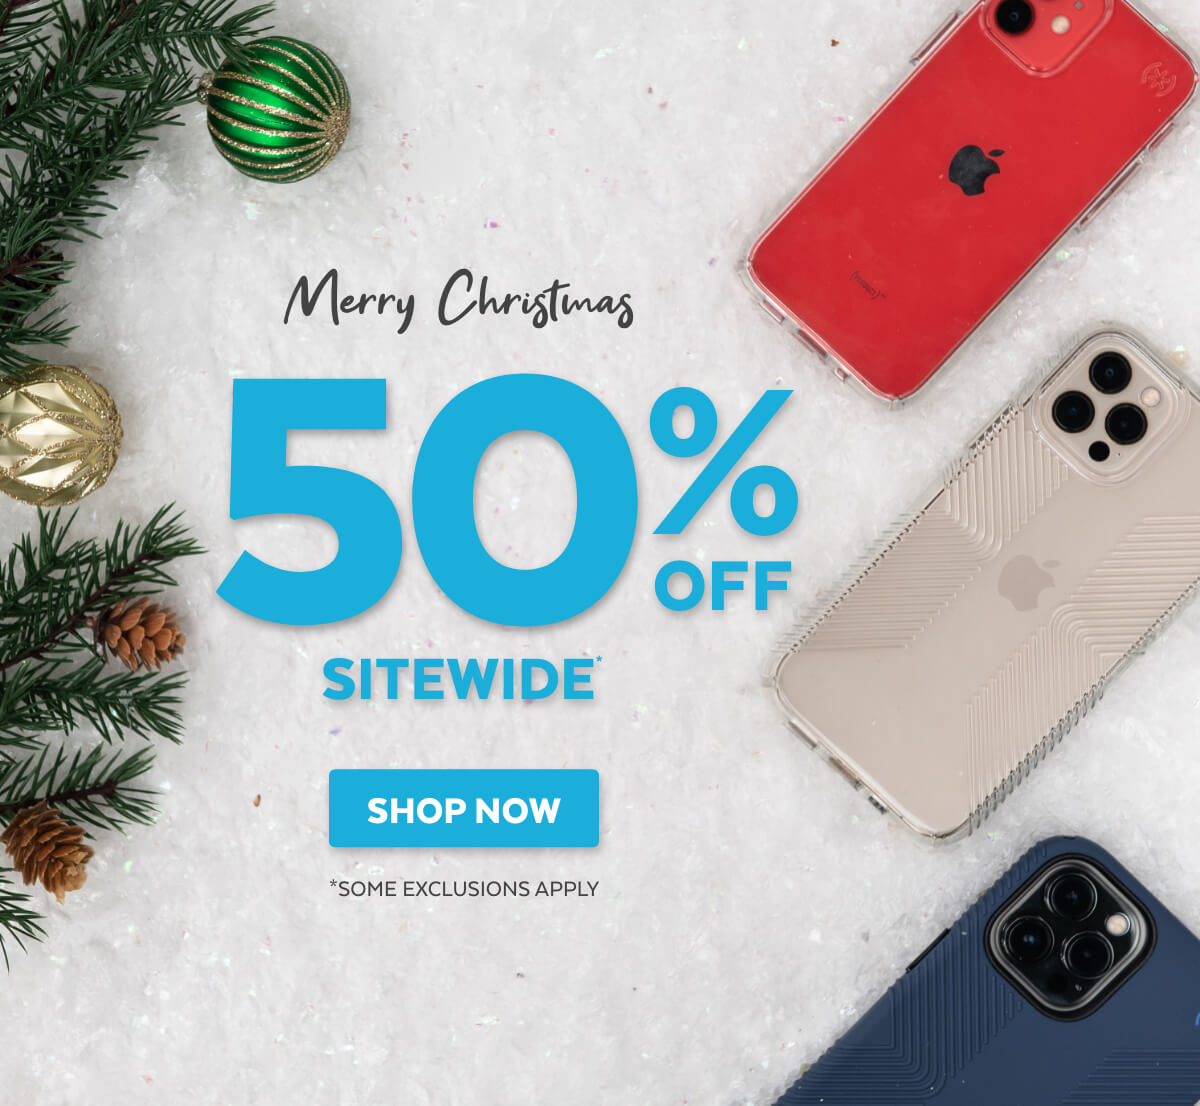 Merry Christmas. 50% off sitewide. Shop now.